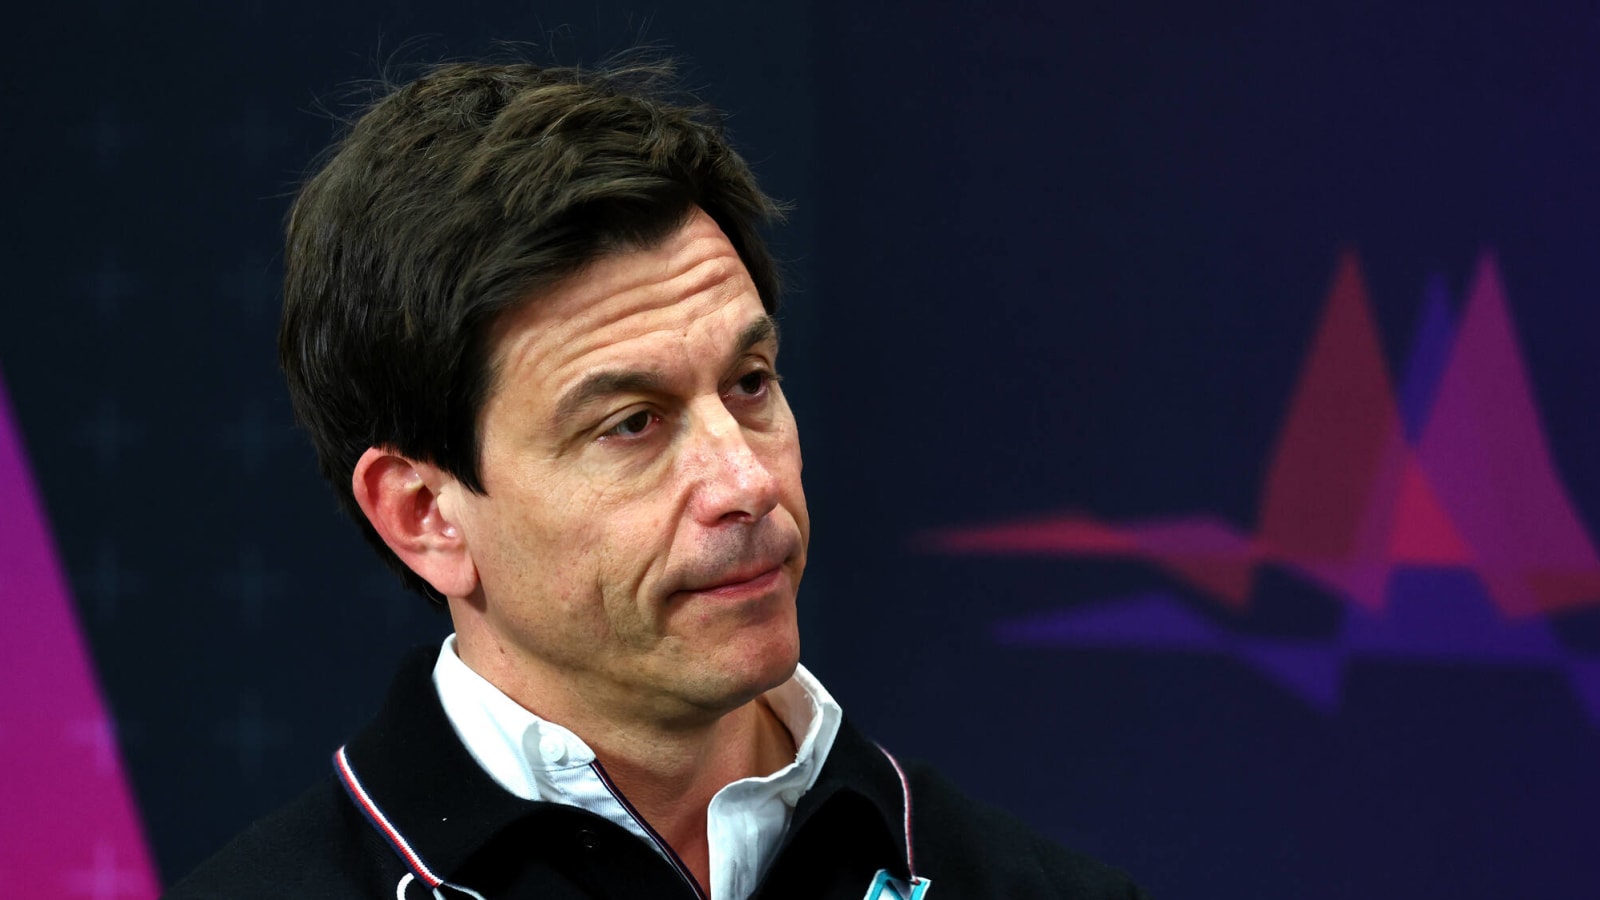 George Russell claims Mercedes has the ‘most successful engineers’ amidst Toto Wolff’s pursuit of Adrian Newey